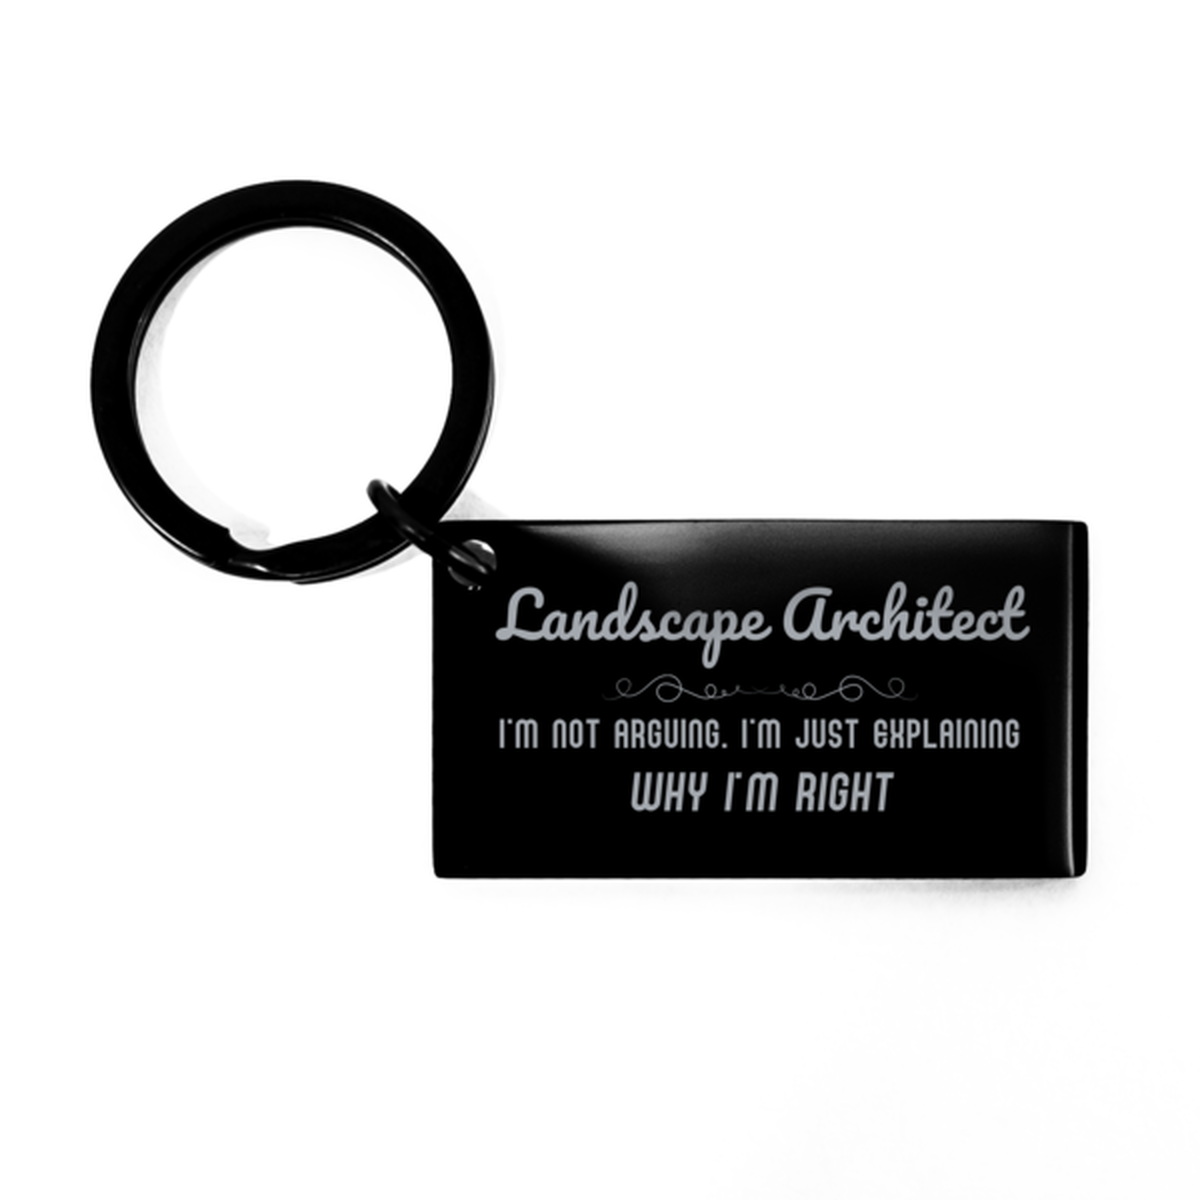 Landscape Architect I'm not Arguing. I'm Just Explaining Why I'm RIGHT Keychain, Funny Saying Quote Landscape Architect Gifts For Landscape Architect Graduation Birthday Christmas Gifts for Men Women Coworker